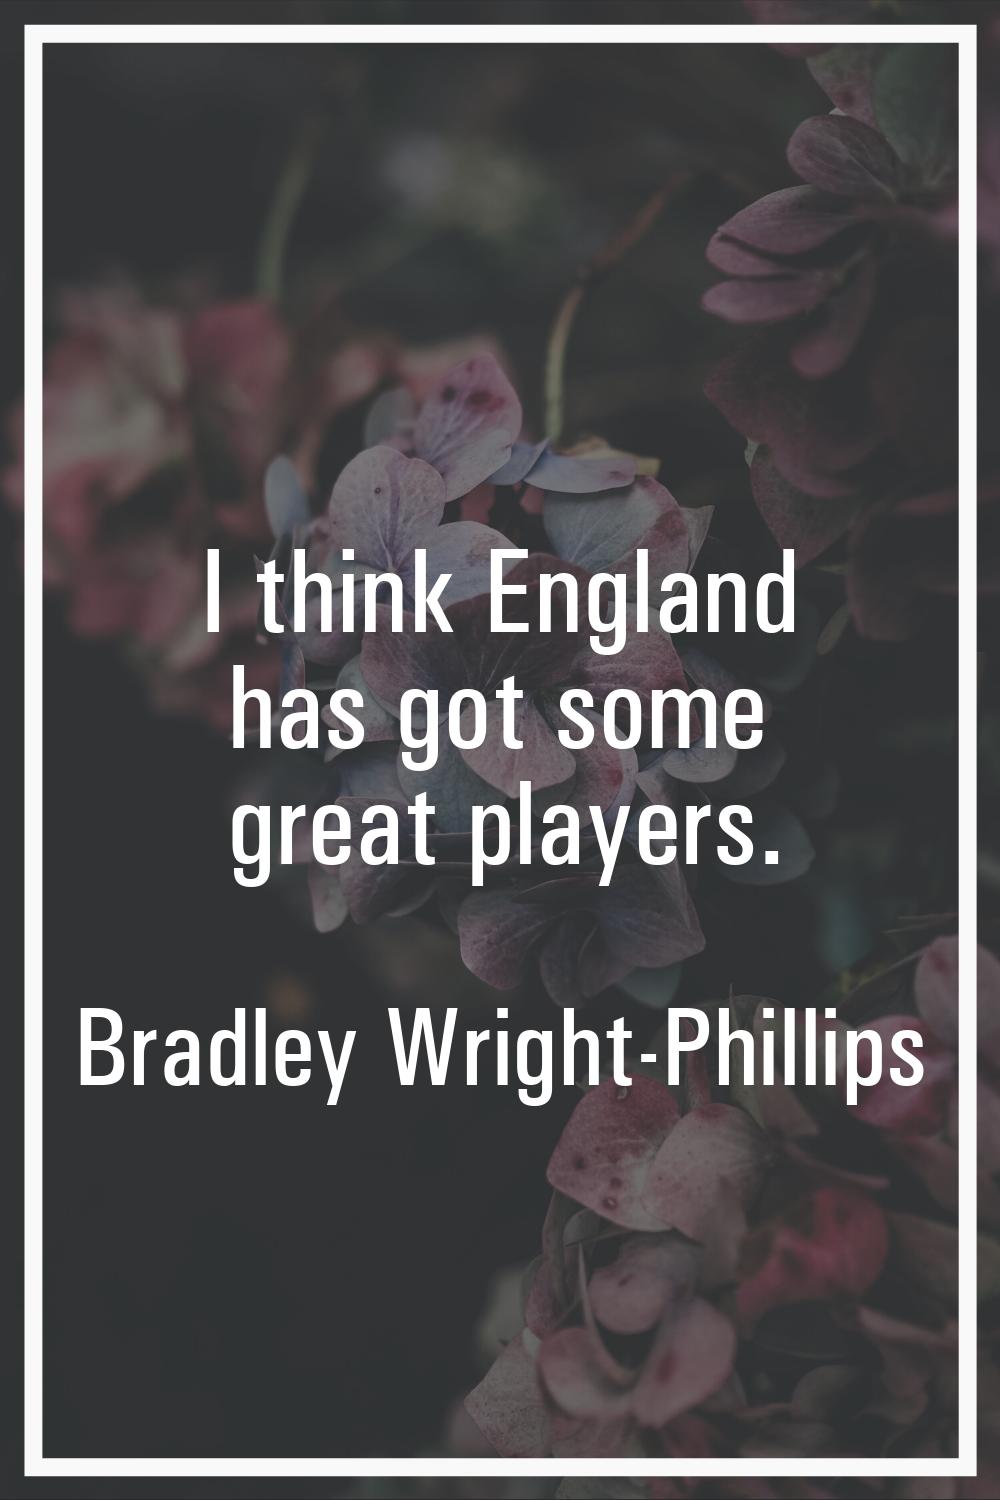 I think England has got some great players.